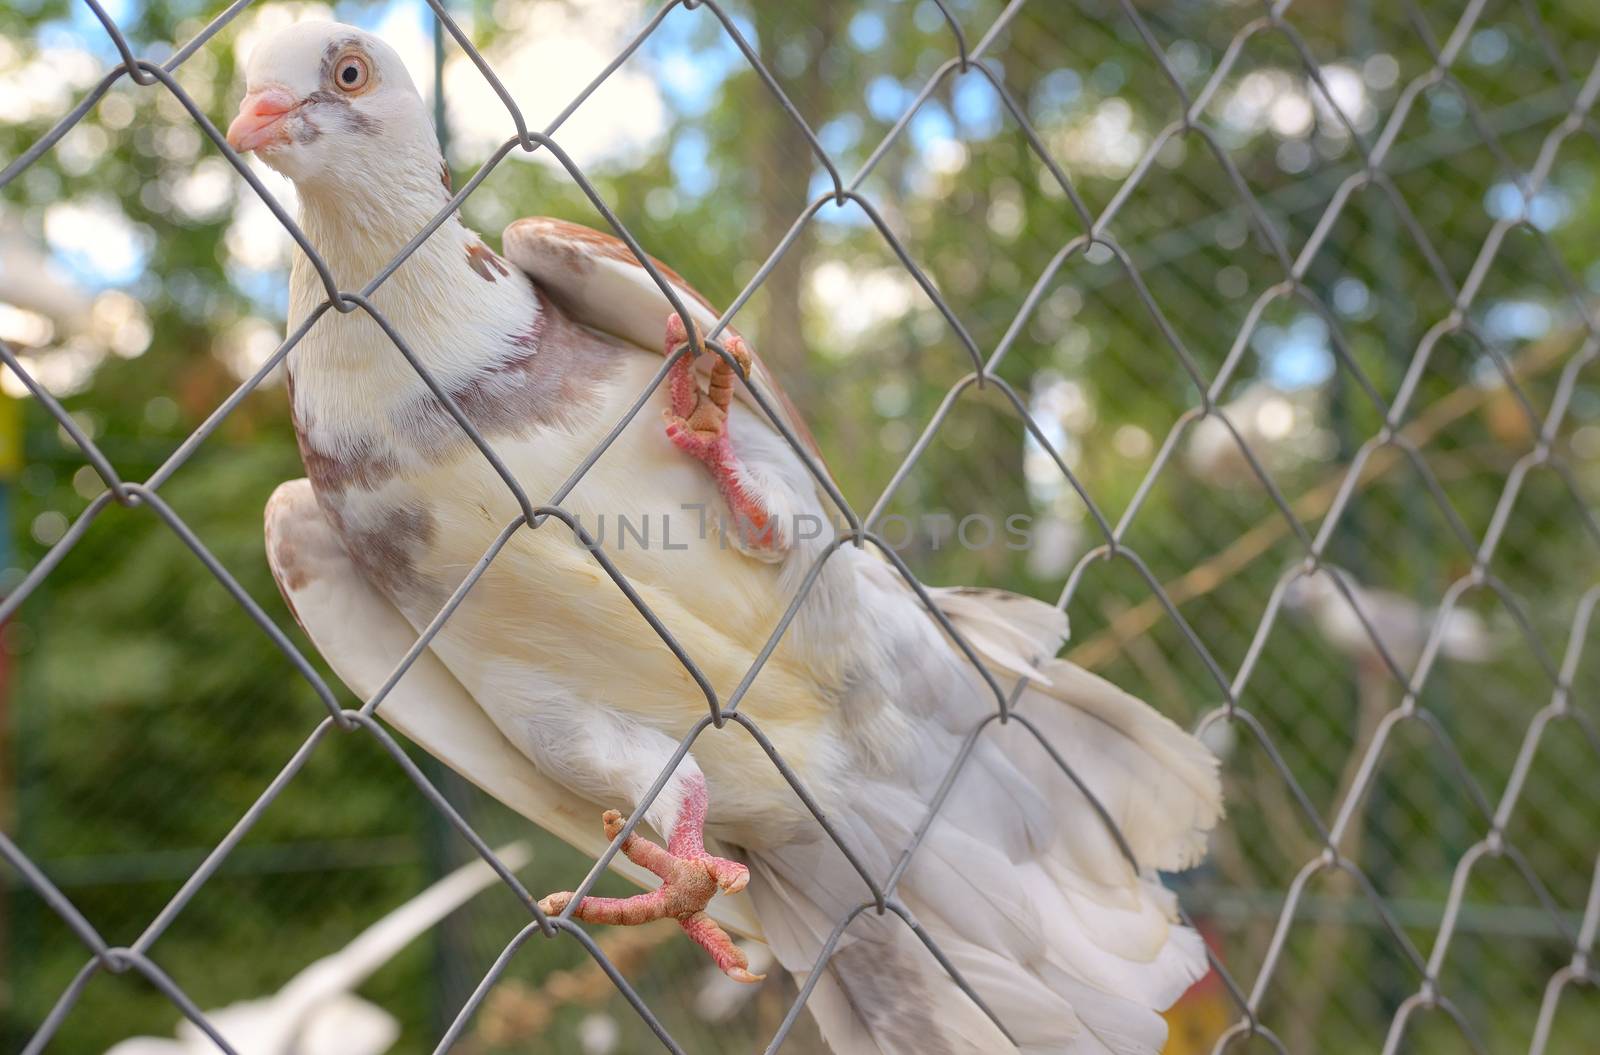 Purebred dove white pigeon on fence